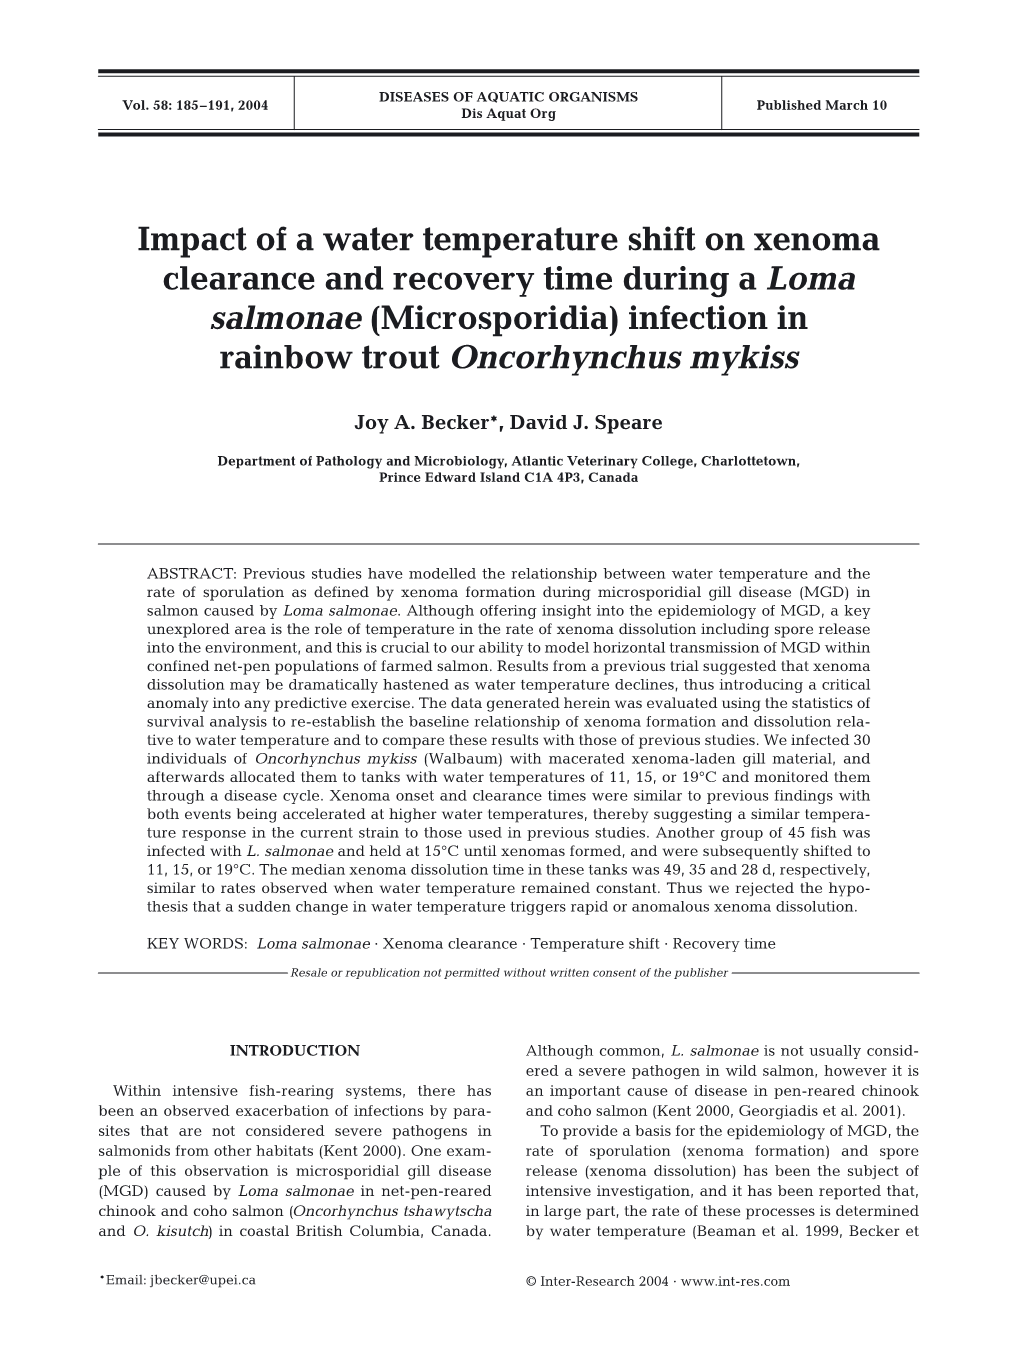 Impact of a Water Temperature Shift on Xenoma Clearance and Recovery Time During a Loma Salmonae (Microsporidia) Infection in Rainbow Trout Oncorhynchus Mykiss